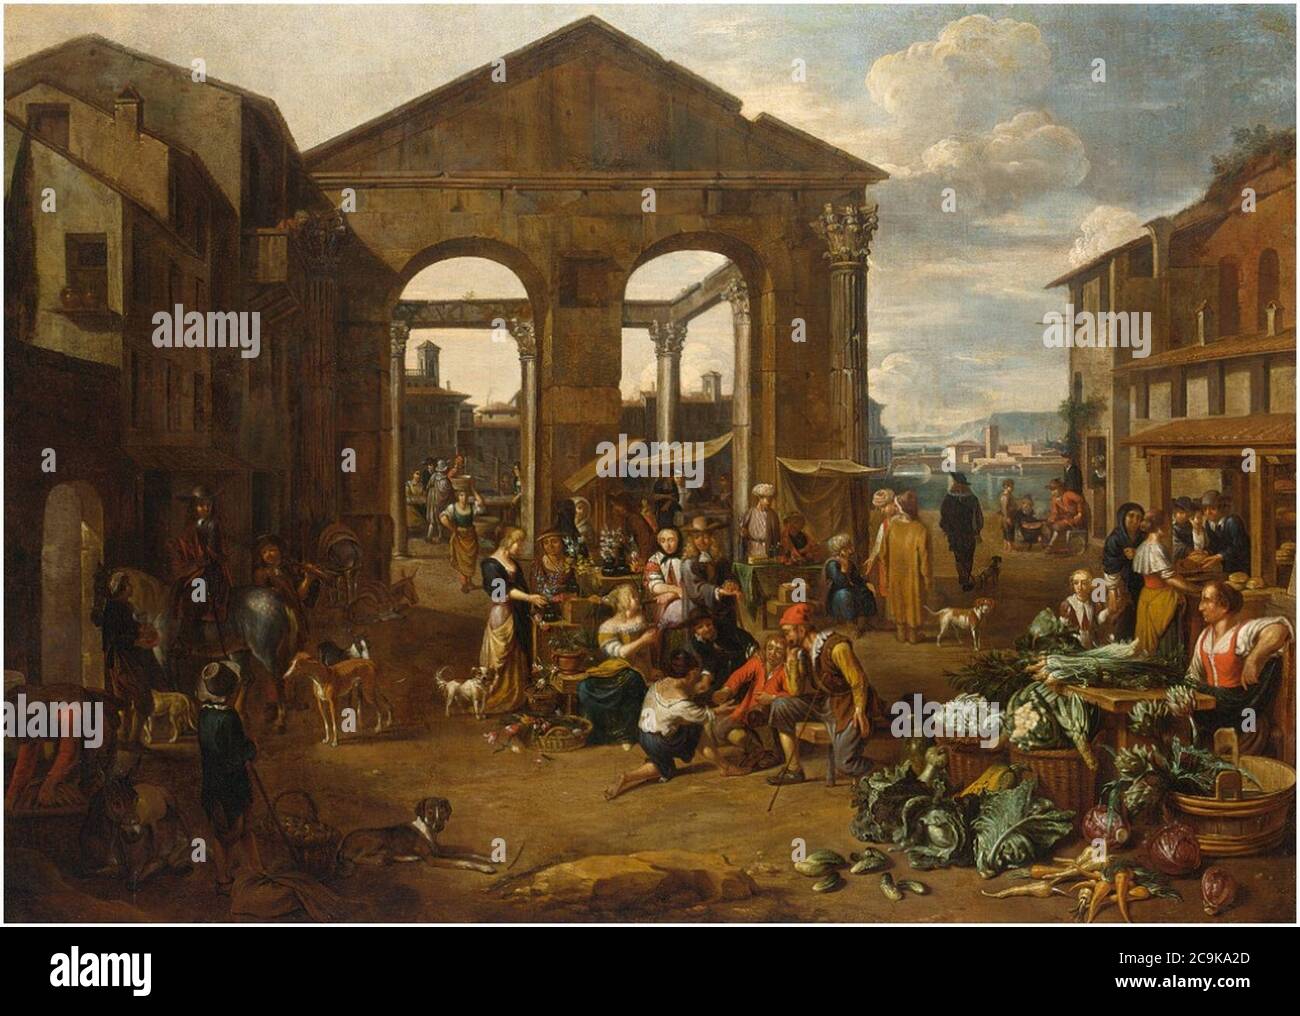 Jan van Buken - An Italianate Market Scene with Remnants of a Roman Temple with a Harbour Beyond. Stock Photo